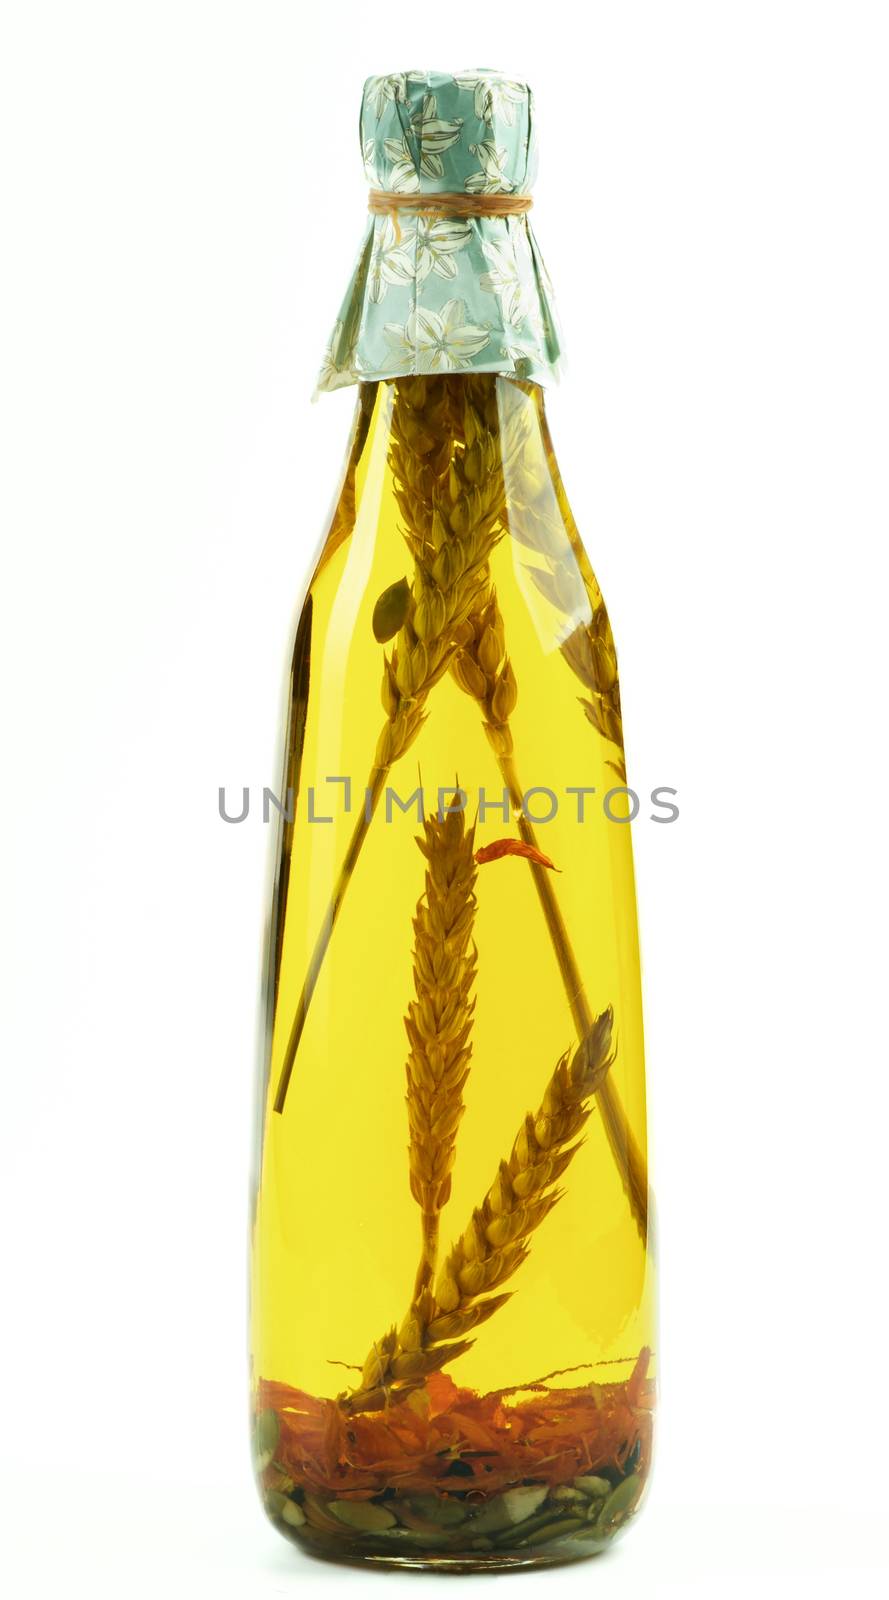 Bottle of Handmade Olive Oil with Stems of Cereals, Herbs and Pumpkin Seeds isolated on White background